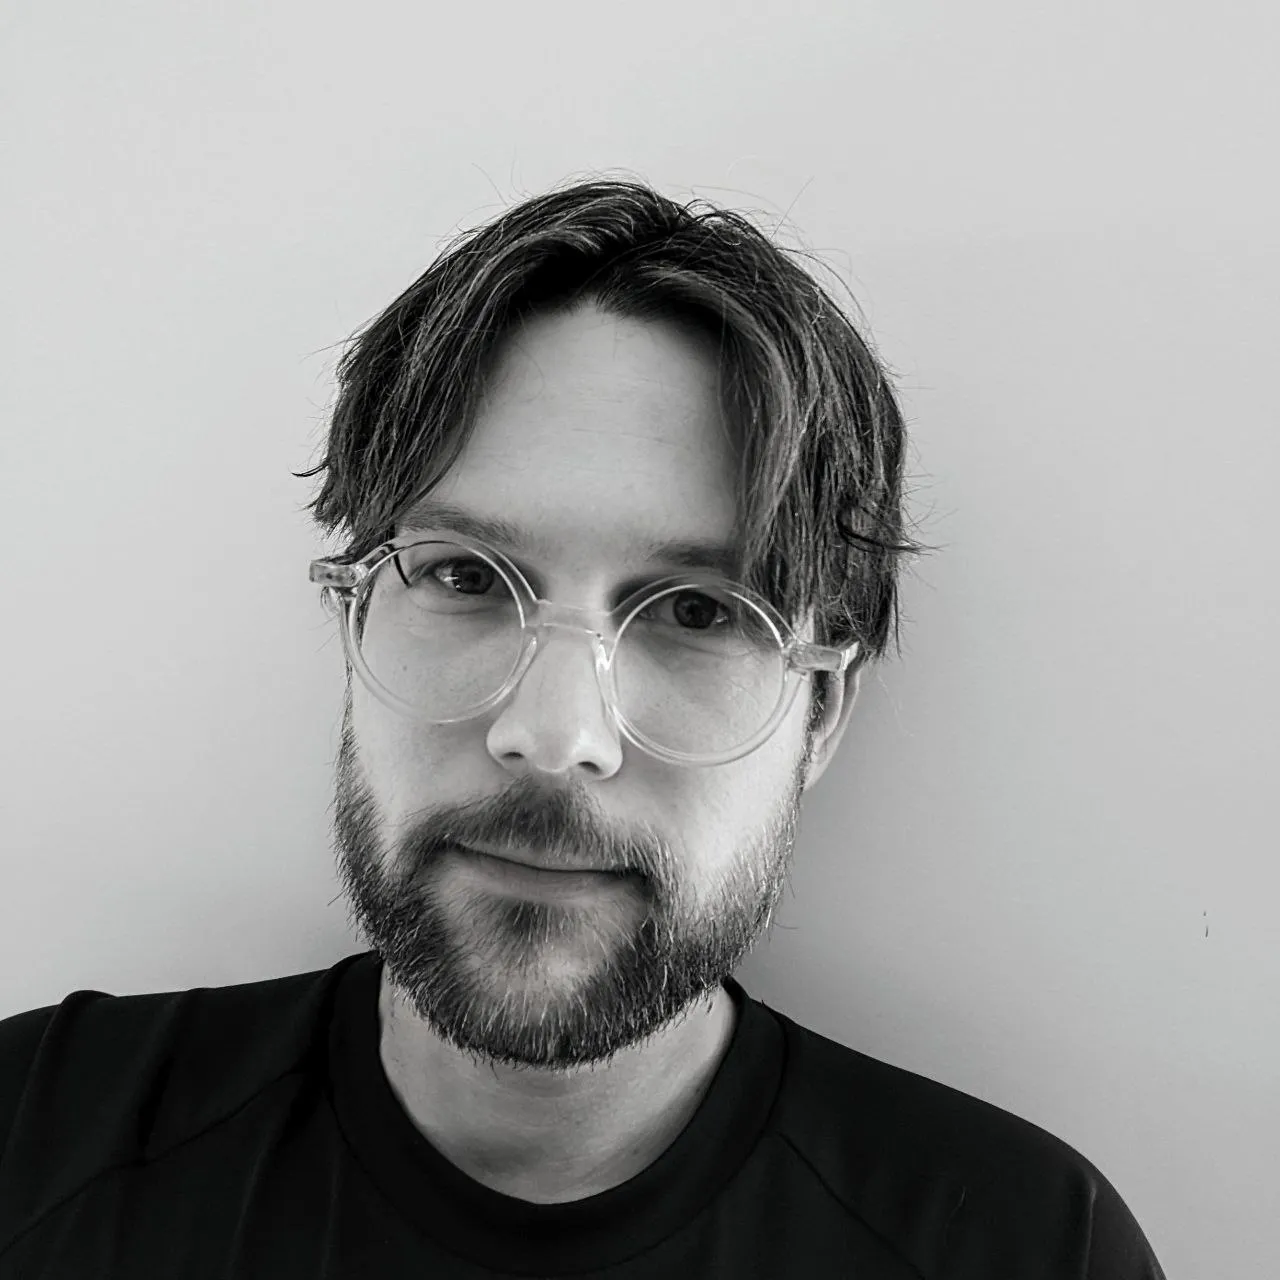 A black and white portrait of Jonathon Toon, wearing glasses.